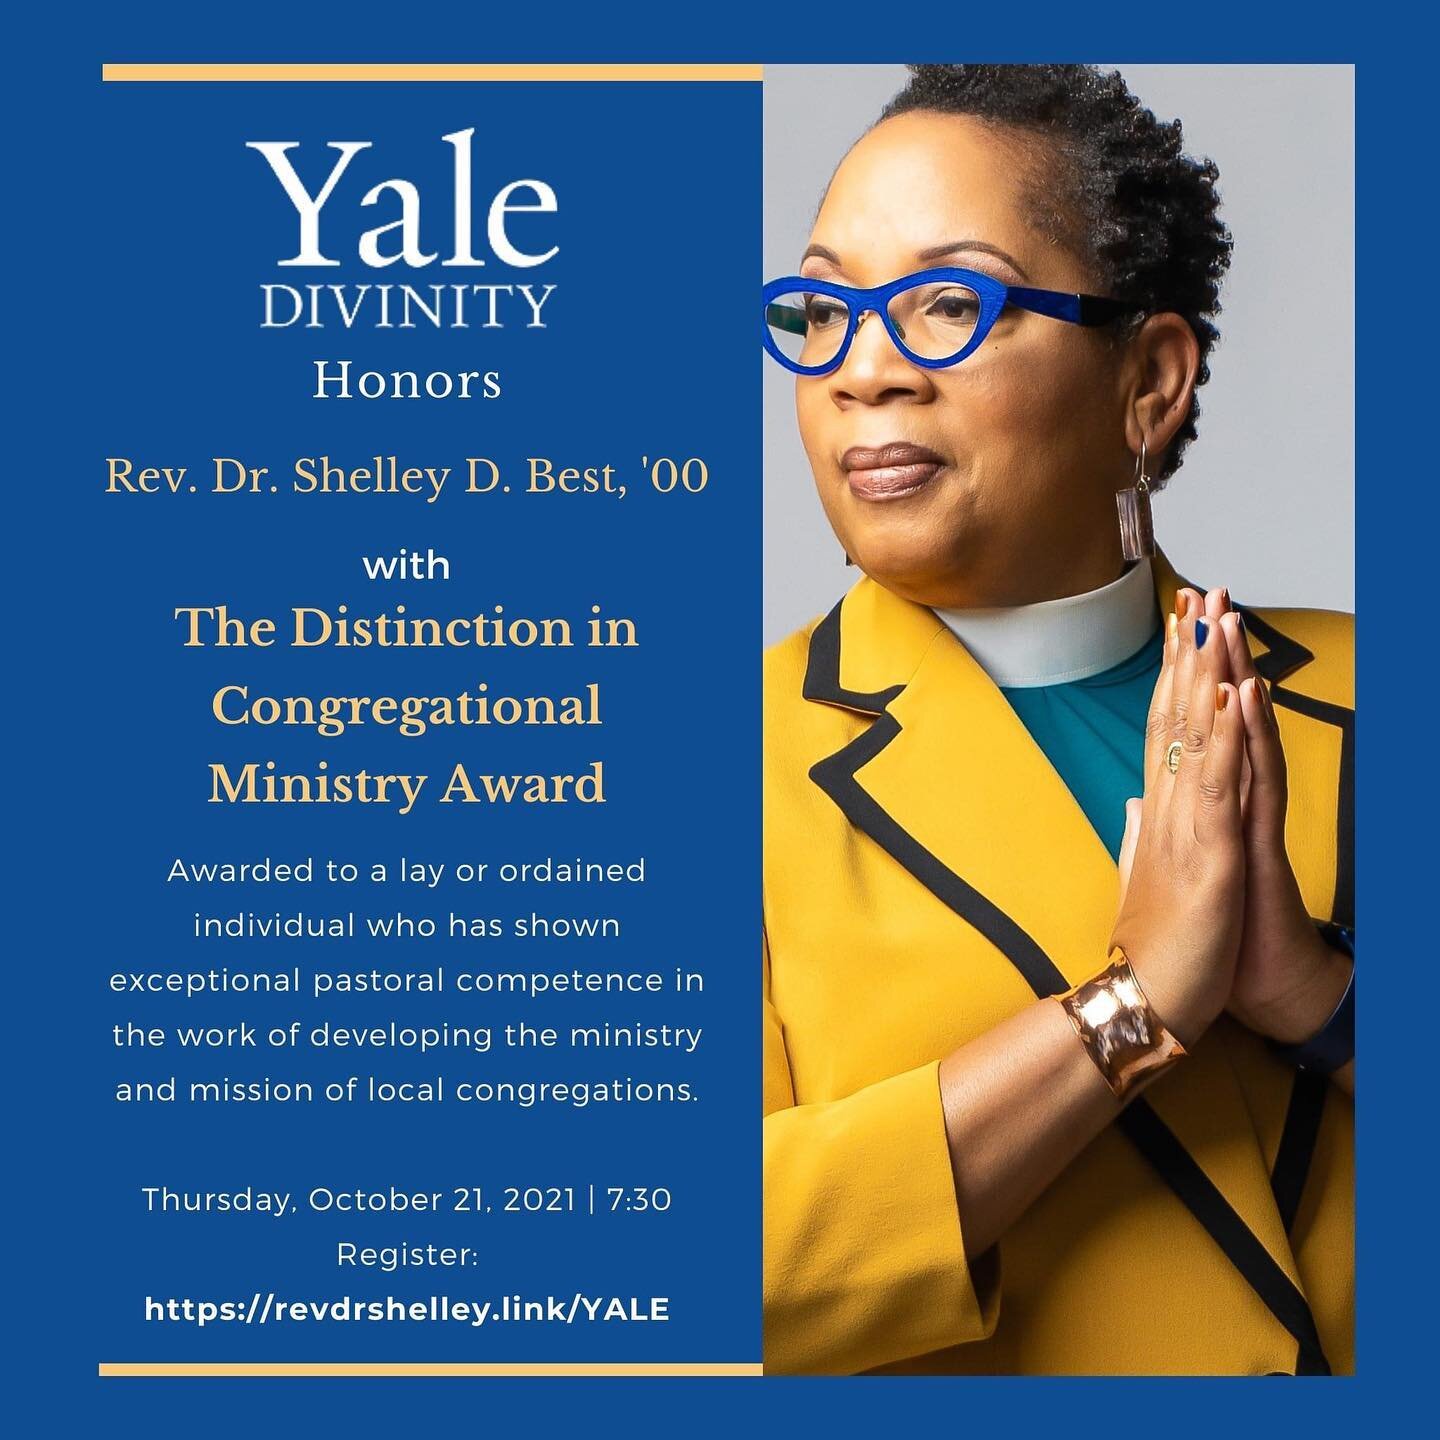 Then this happened! My heart is full to receive this significant recognition of my ministry from Yale on October 21st.  The event is free and open to all and will be hosted on Zoom.  Simply register at: https://revdrshelley.link/YALE